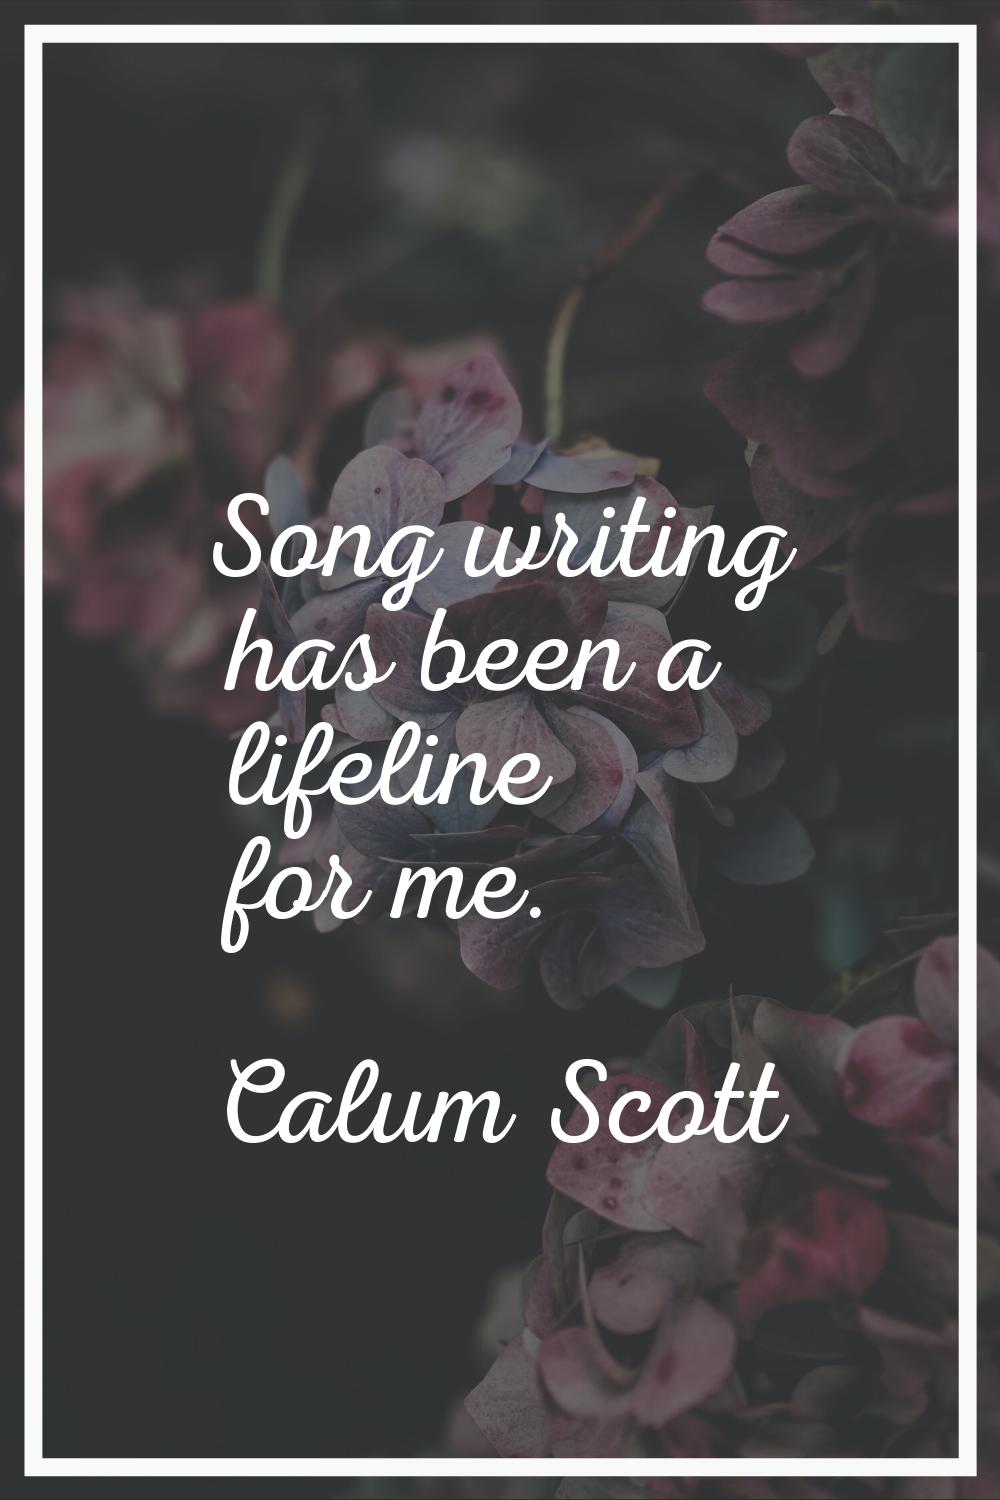 Song writing has been a lifeline for me.